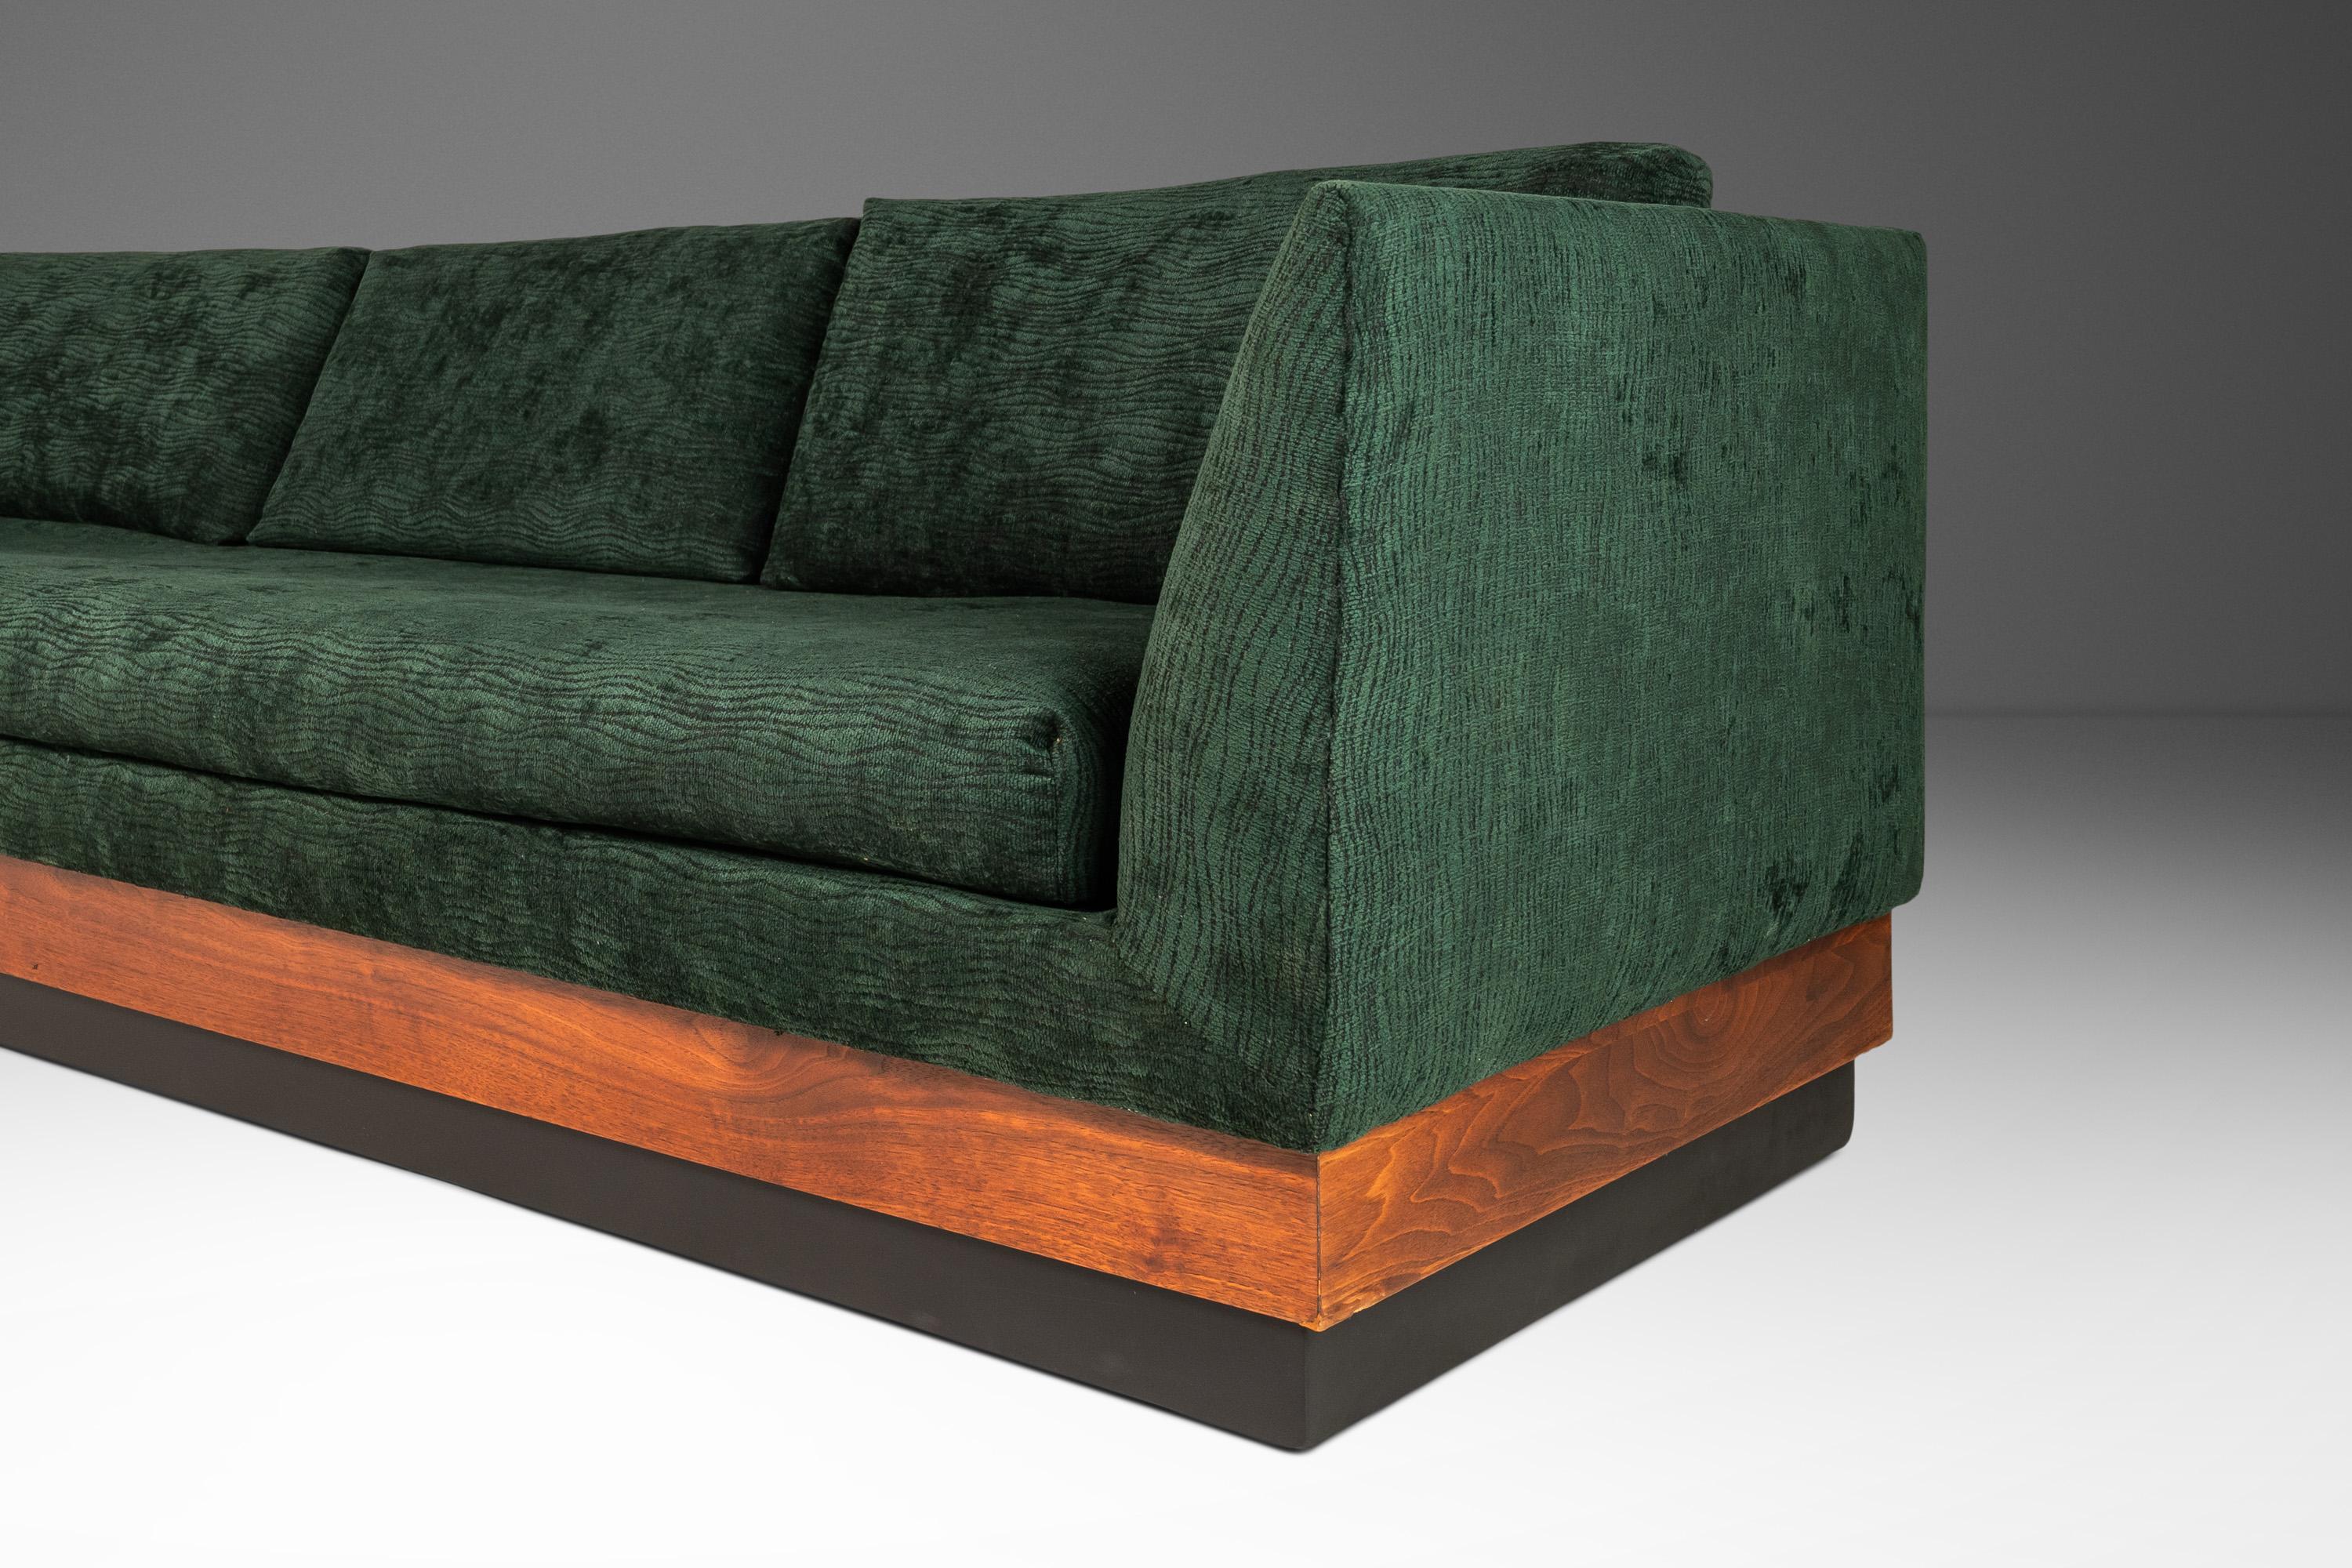 MCM Platform Sofa in Walnut by Adrian Pearsall for Craft Associates, c. 1960's For Sale 11